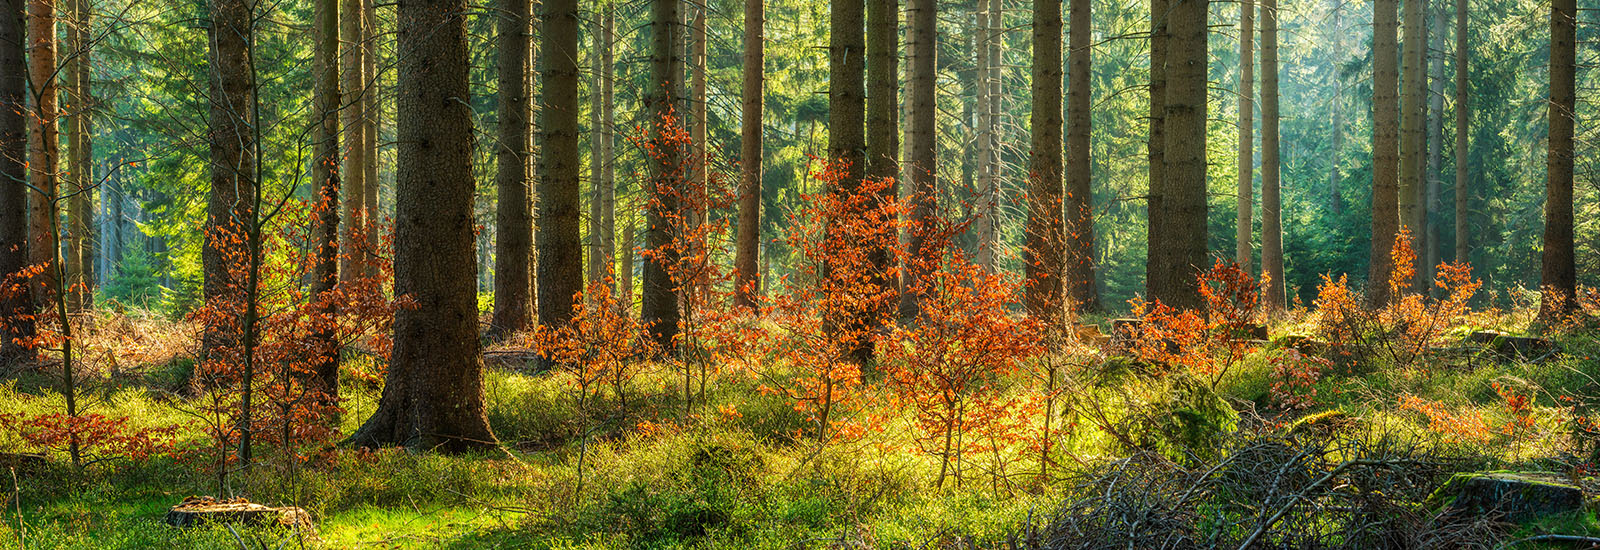 Forest during autumn.